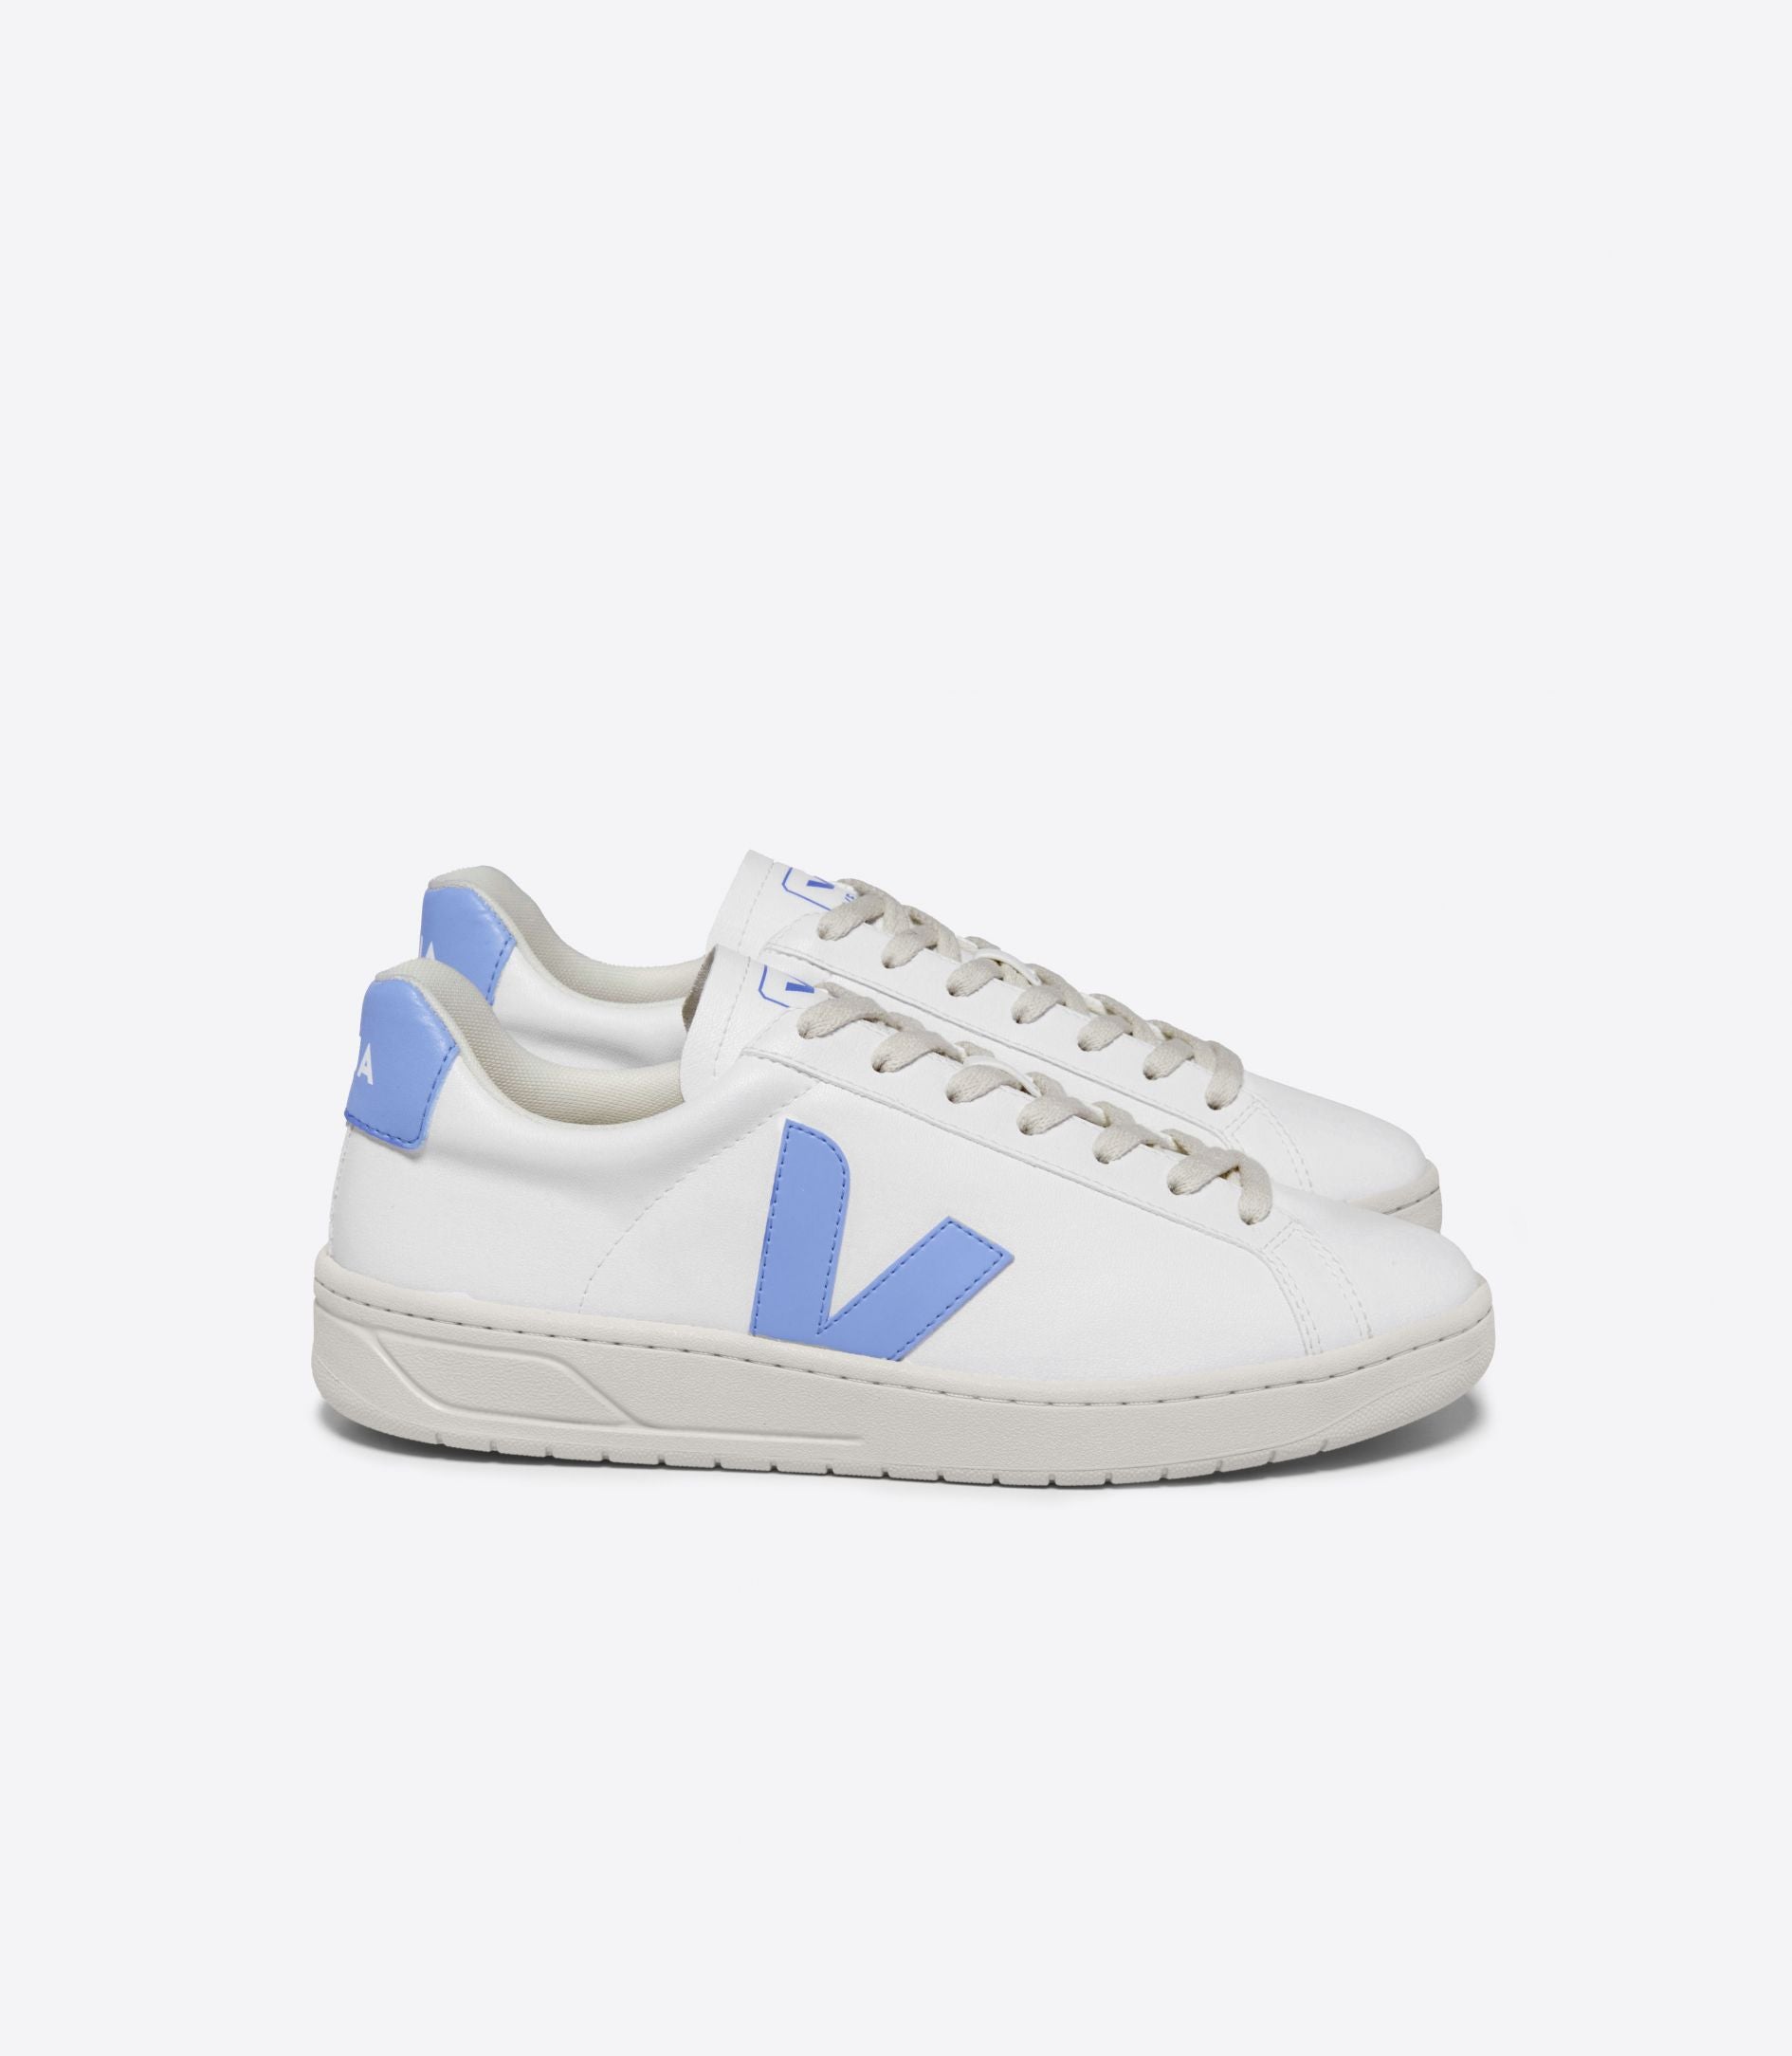 VEJA uses Brazilian and Peruvian organic cotton for the canvas and laces, Amazonian rubber for the soles, and various innovative materials conceived in recycled plastic bottles or recycled polyester.